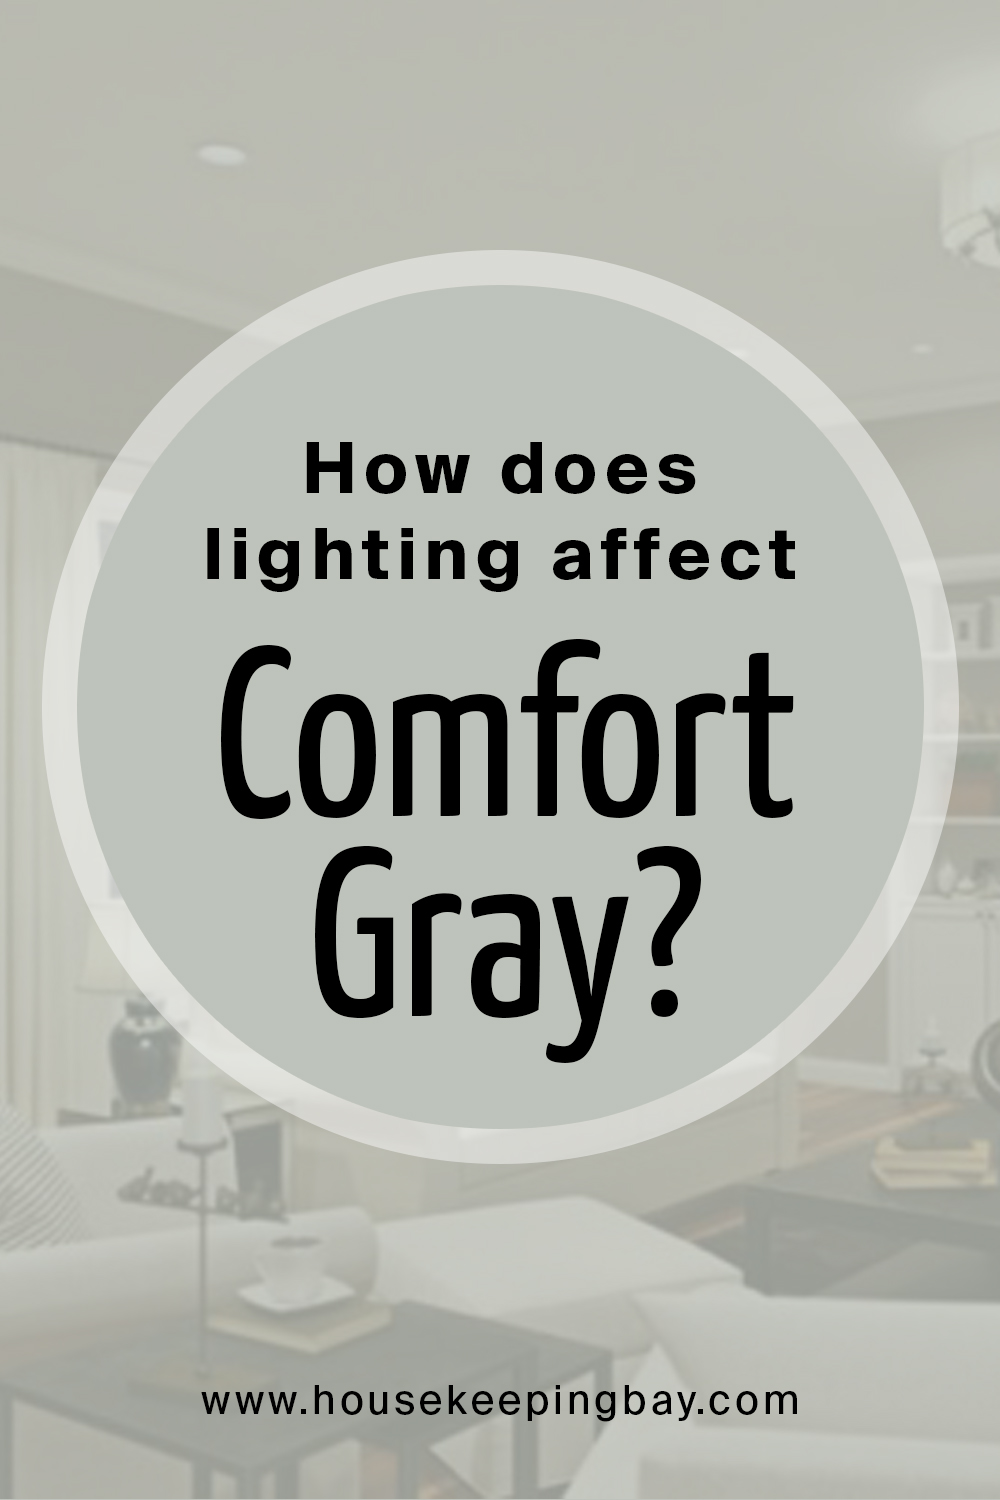 How does lighting affect Comfort Gray